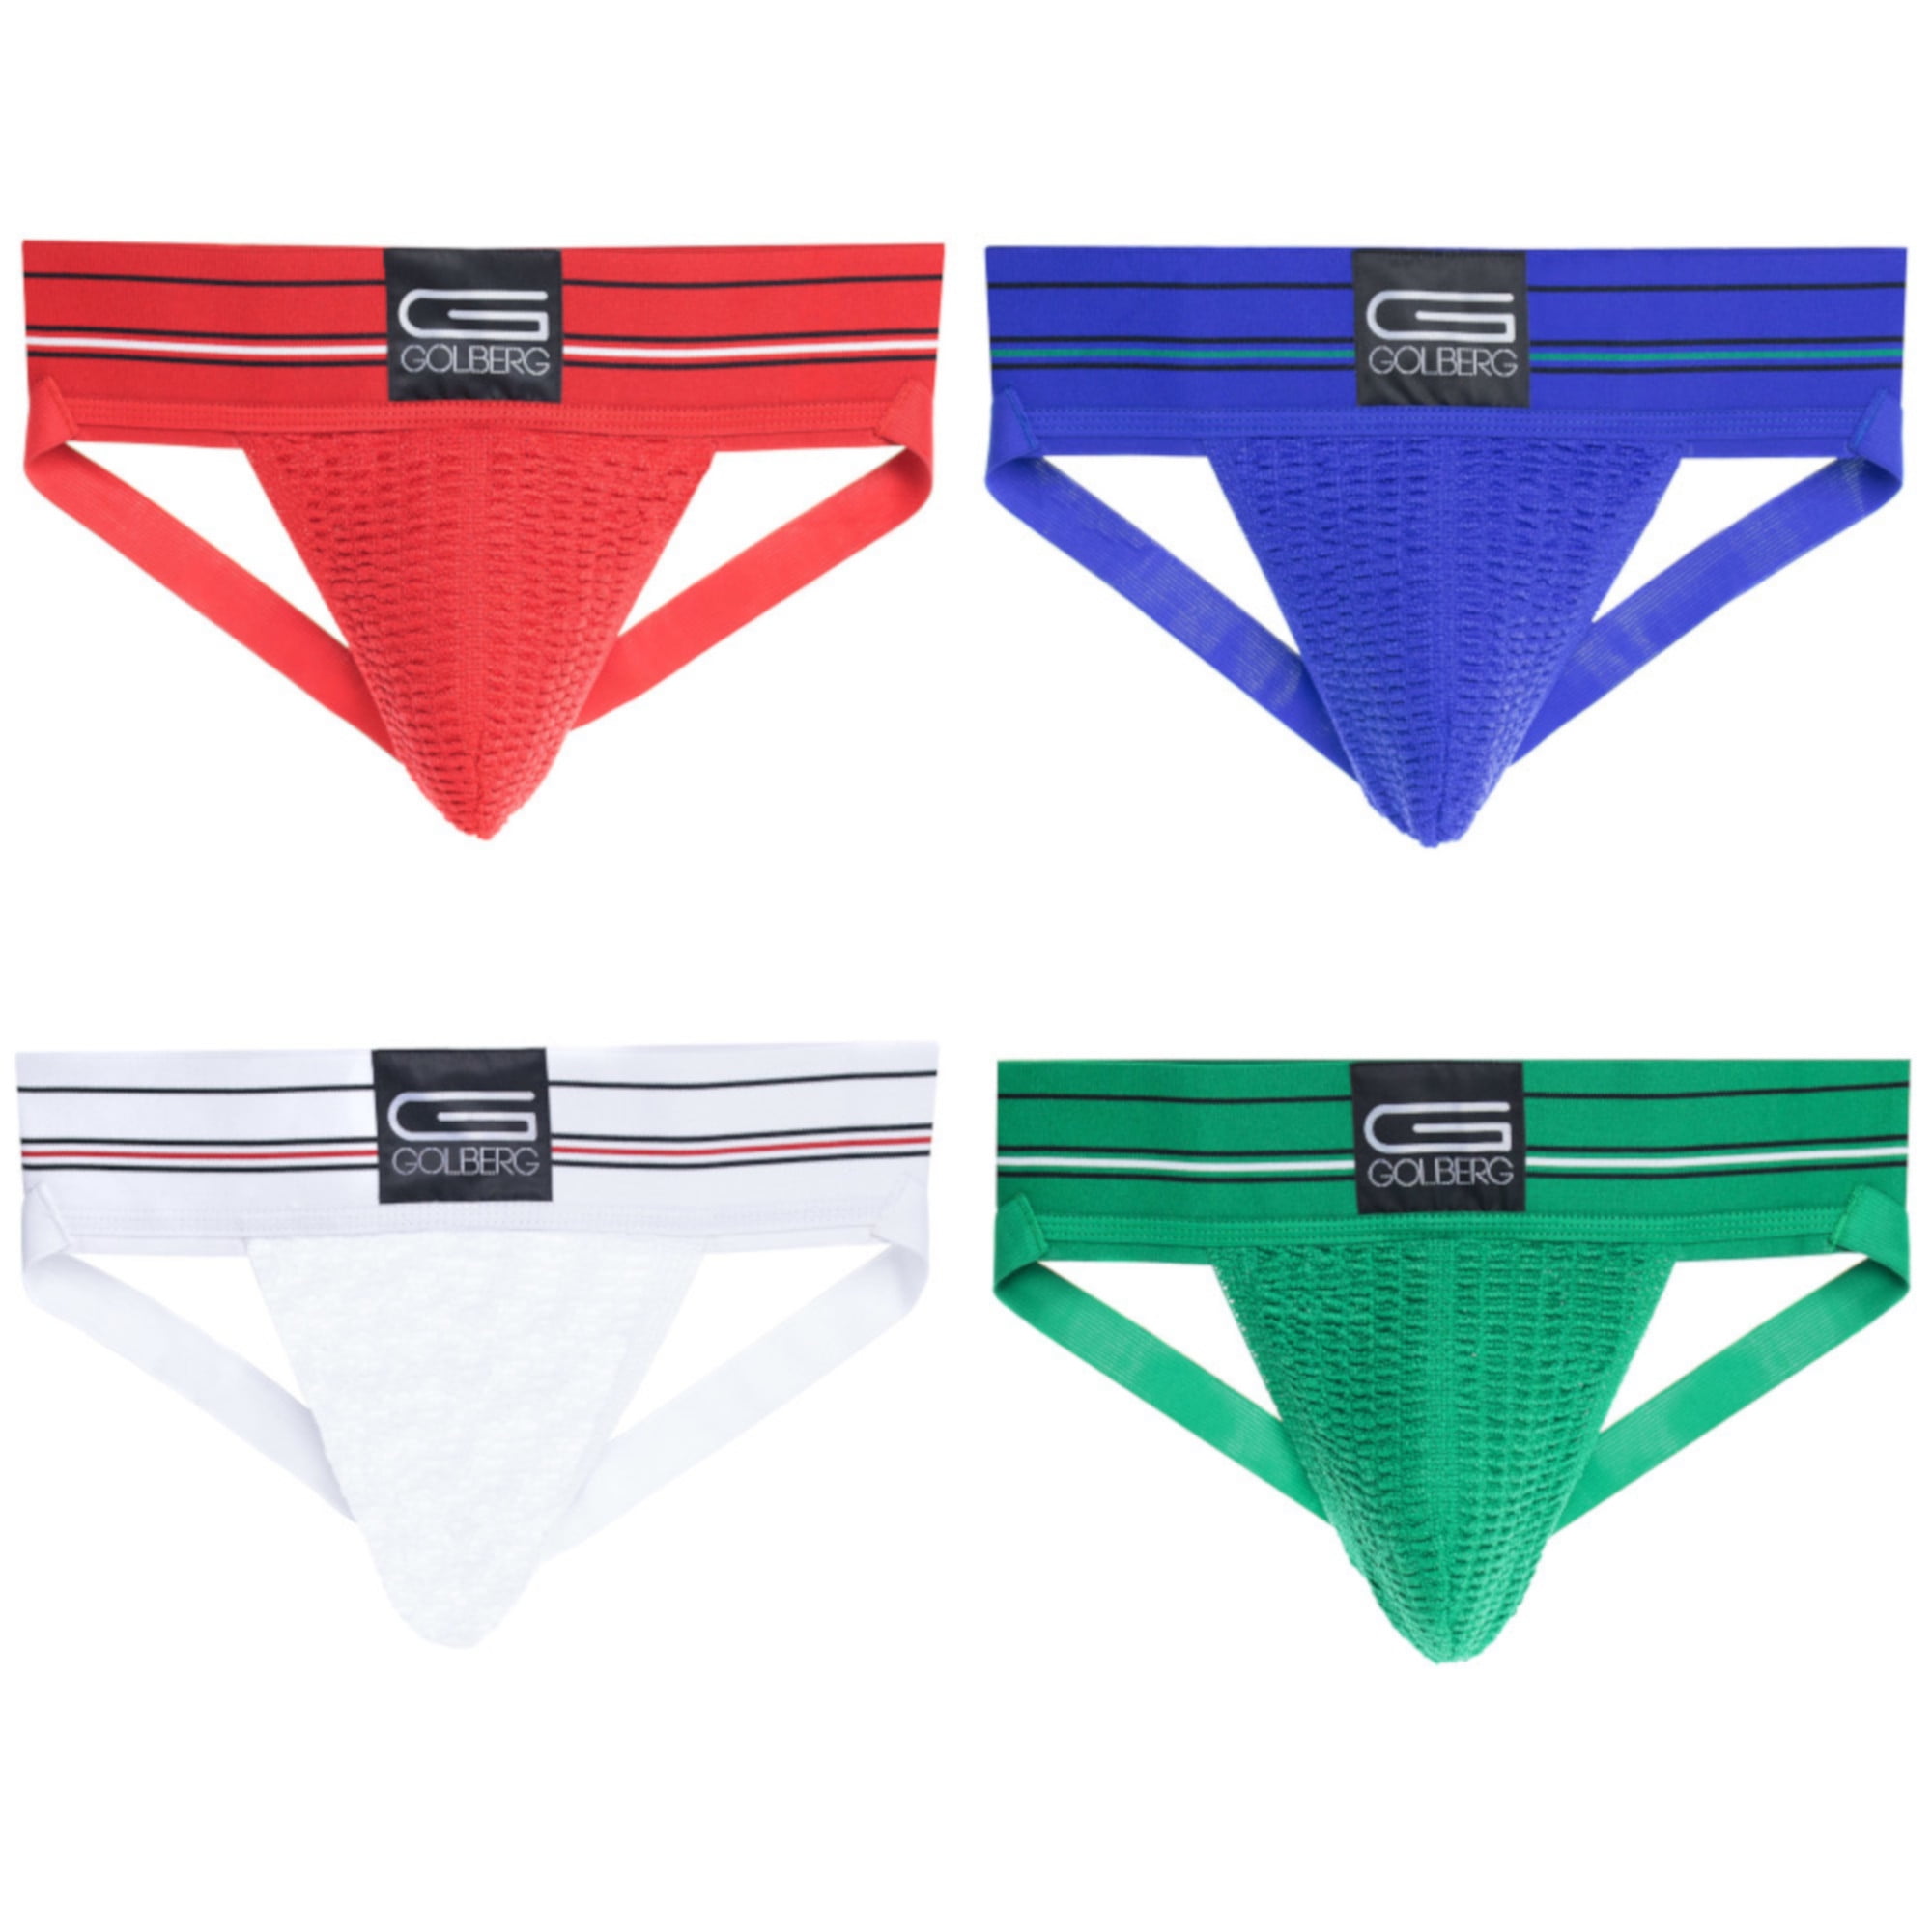 GOLBERG Athletic Supporter 2 Pack 